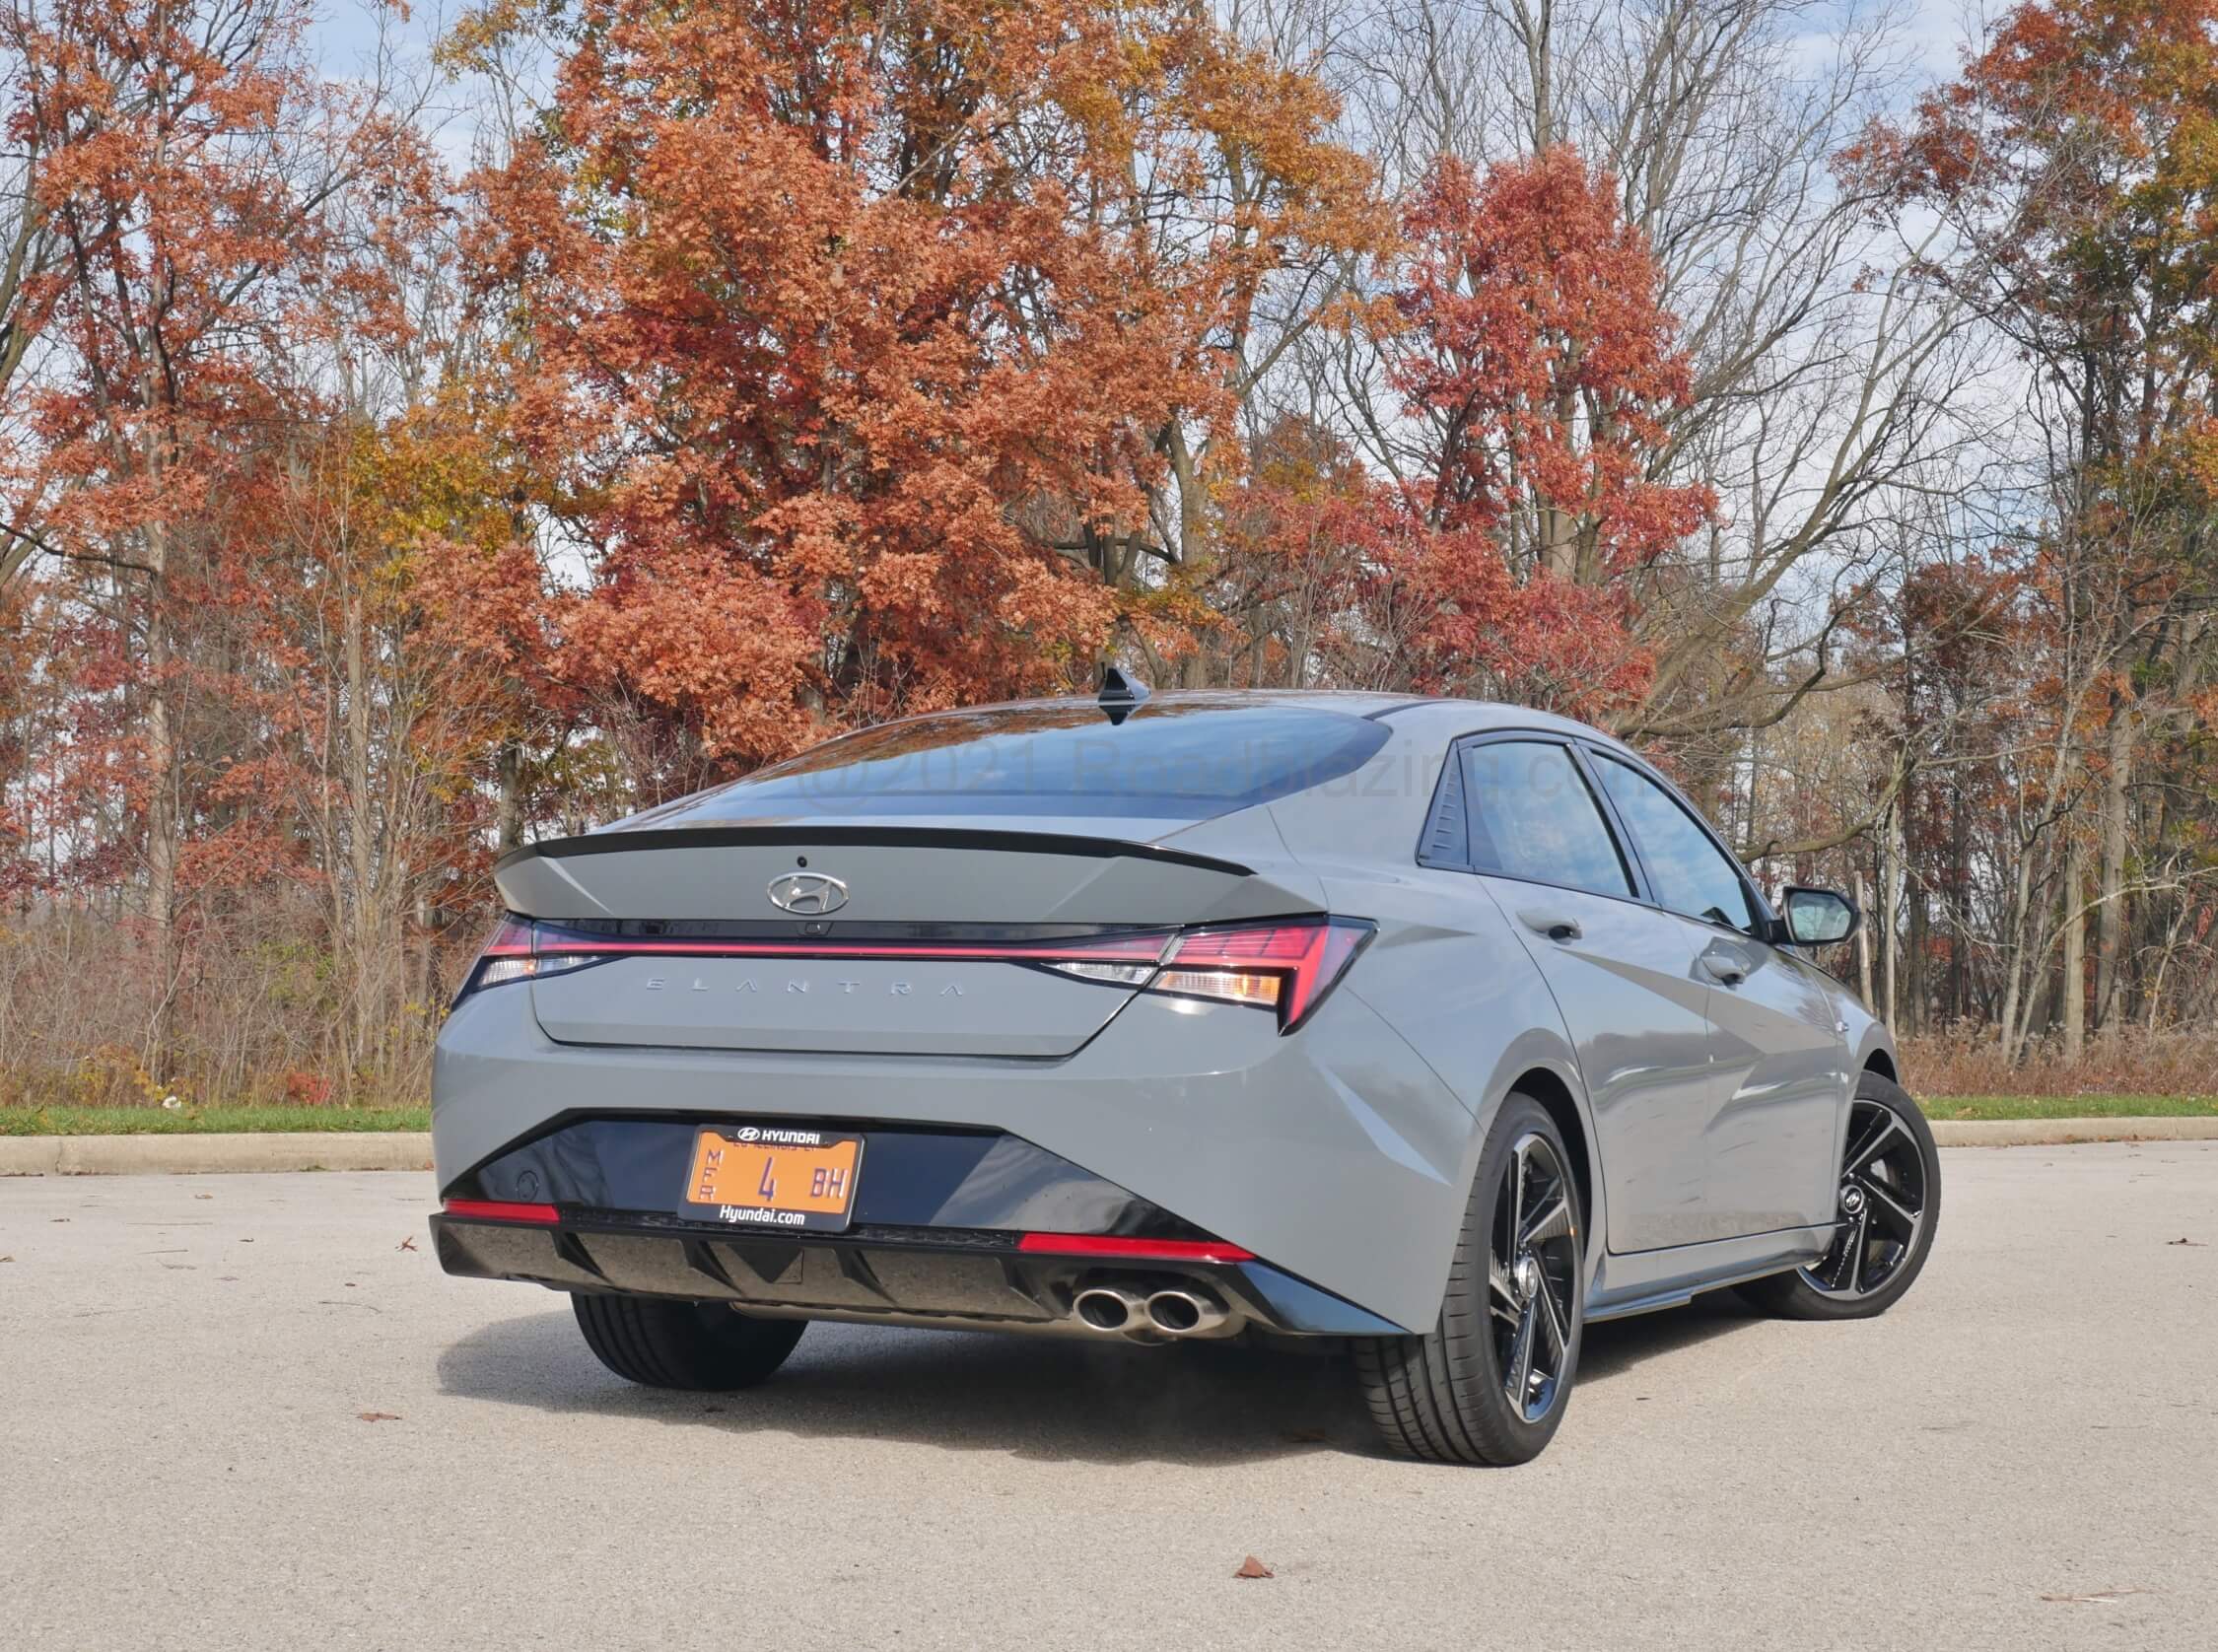 2021 Hyundai Elantra N-Line 1.6T: subtle darkened trunk lid spoiler, followed by raceway unified taillamps, lower valance diffuser